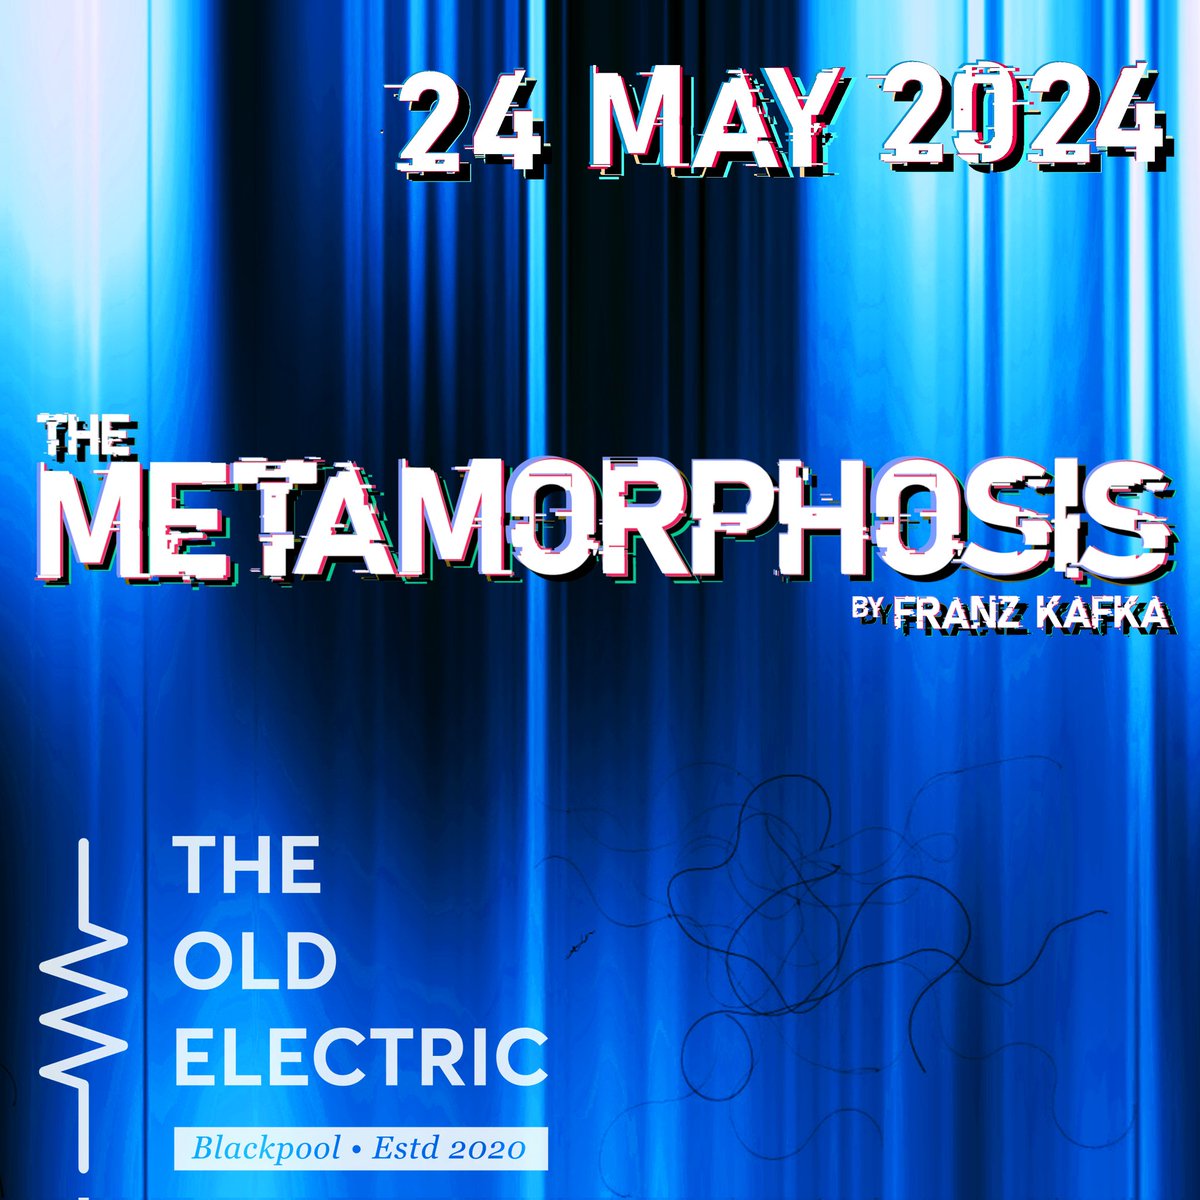 Metamorphosis the play will be at the Old Electric @theoldelectric on the 24th May. Link to tickets in profile.  mildperiltheatre.co.uk/Tour-dates/ #theatre #kafka #themetamorphosis #drama #independenttheatre #theatreproduction  #touringtheatre #uktheatre #theatrecompany #theatrearts